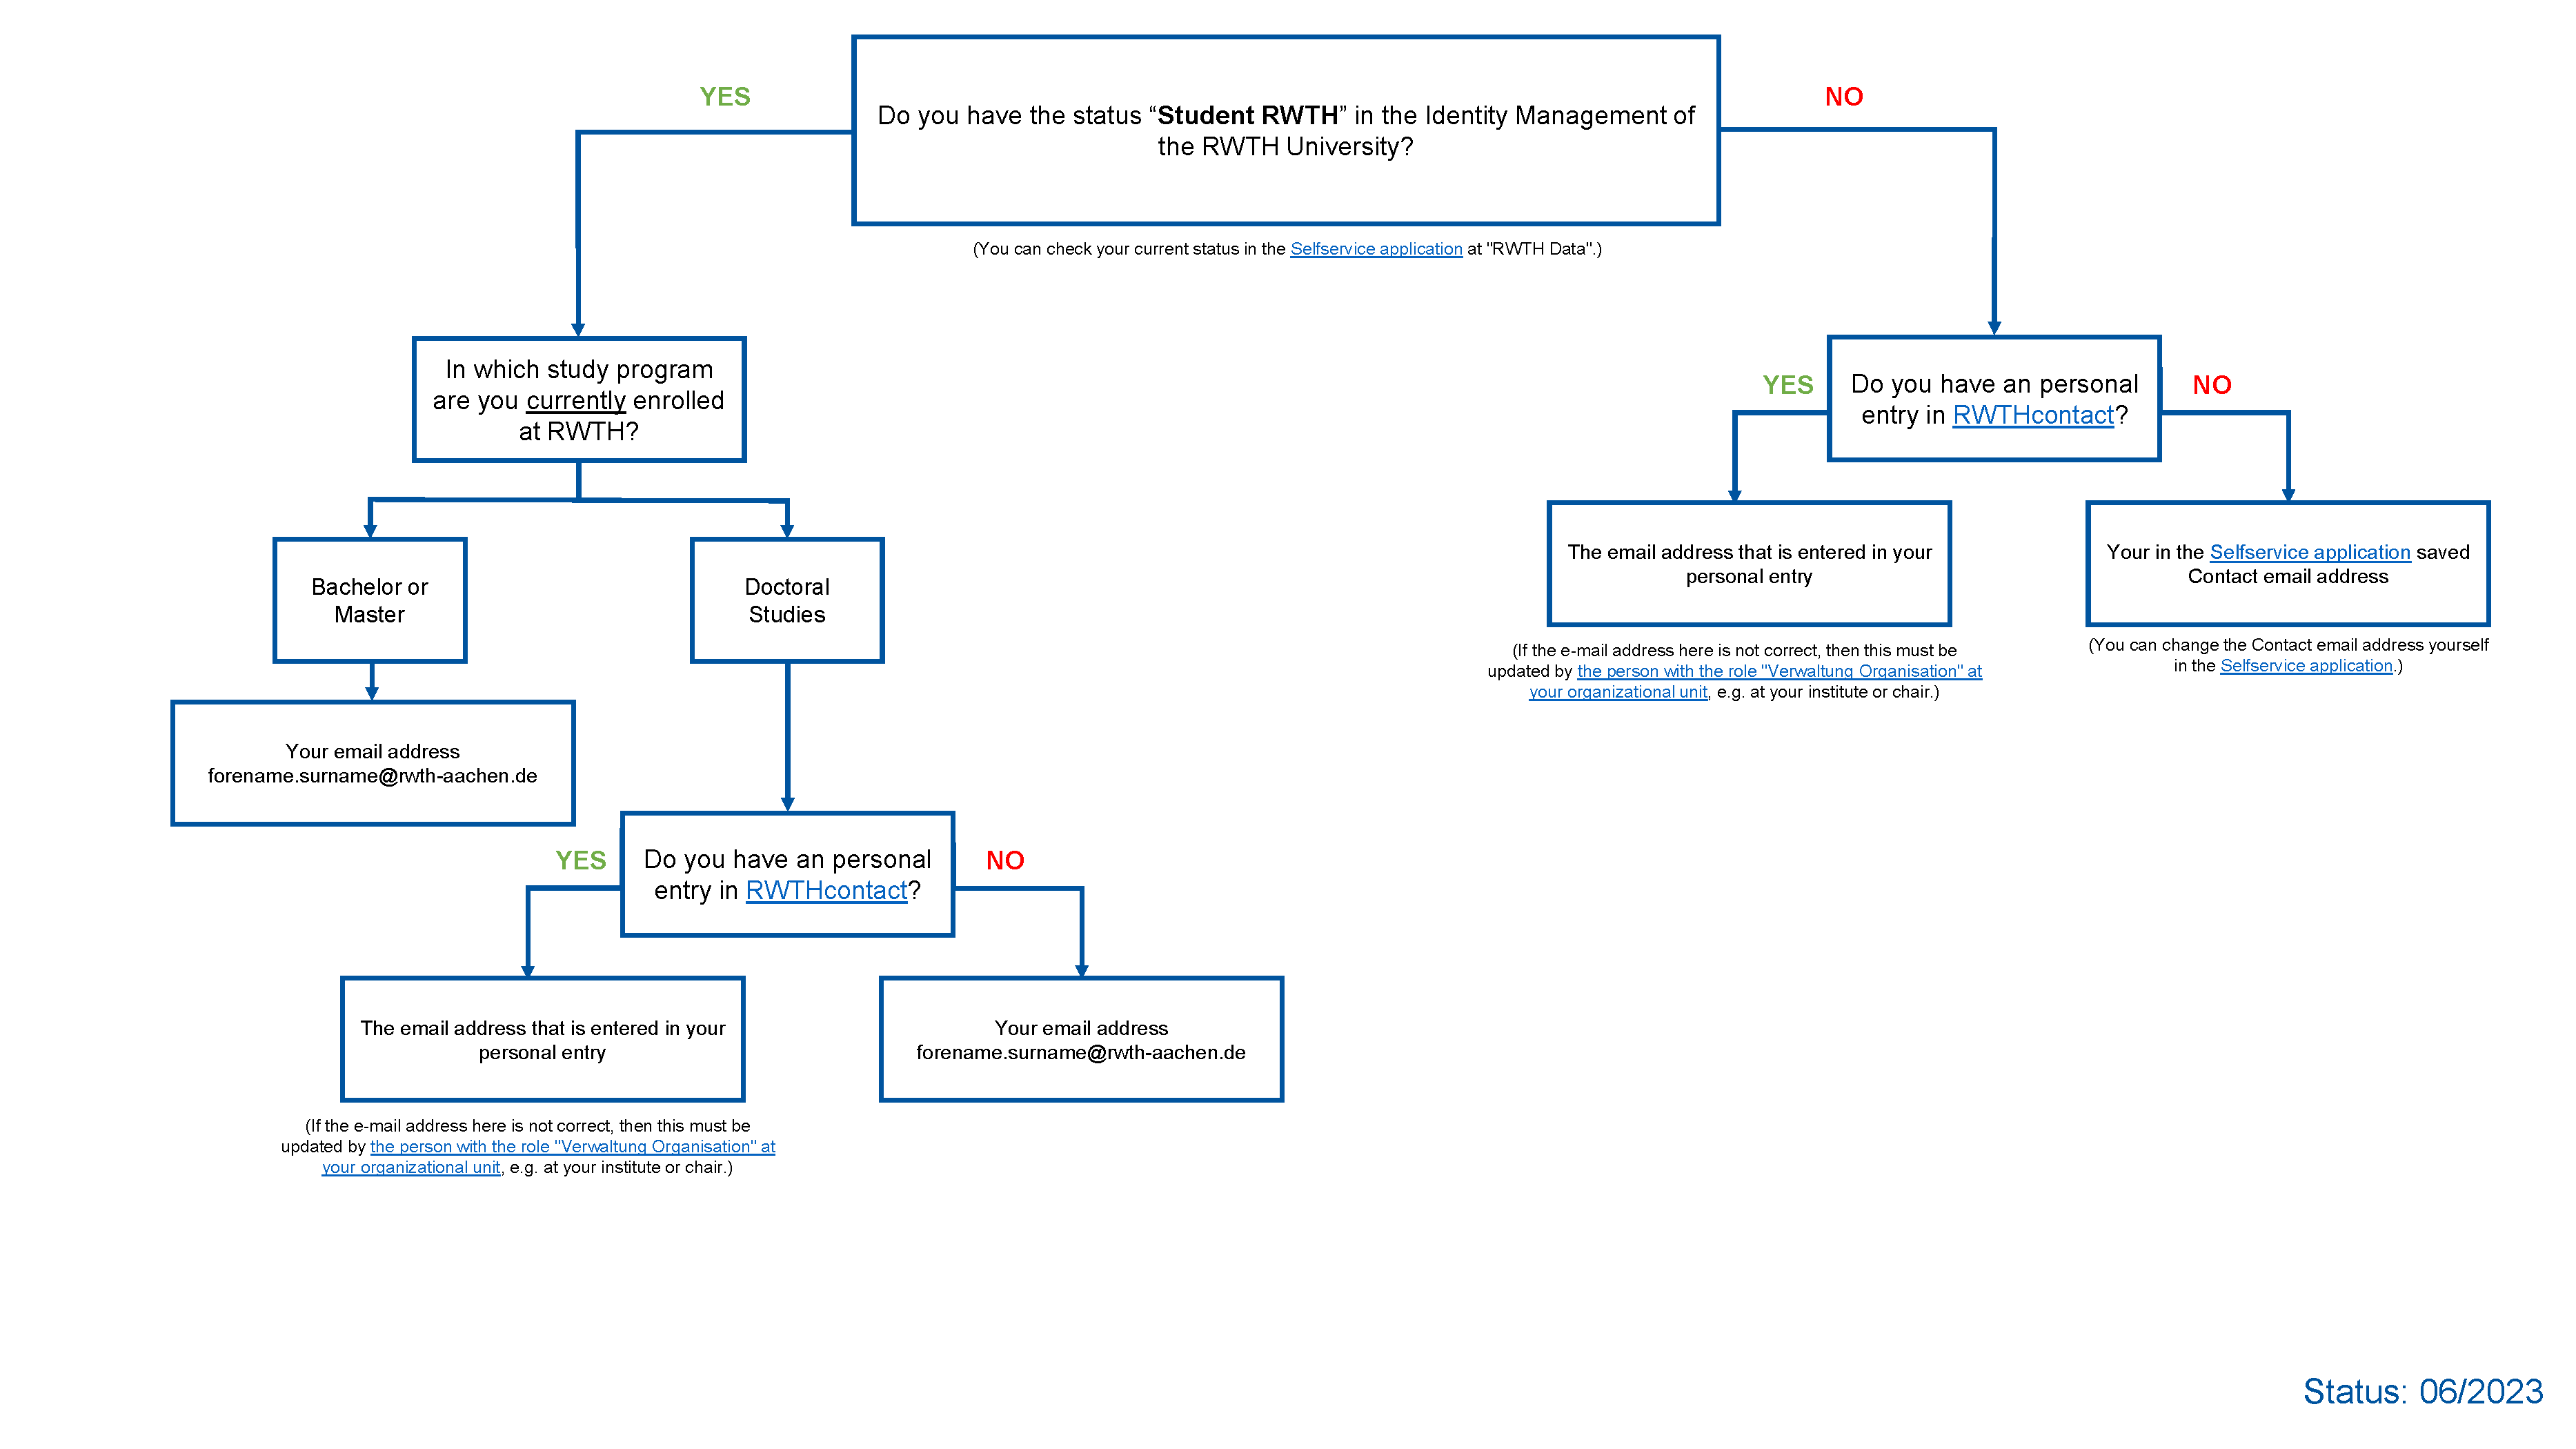 This flowchart shows how your email address is determined, that will be displayed.